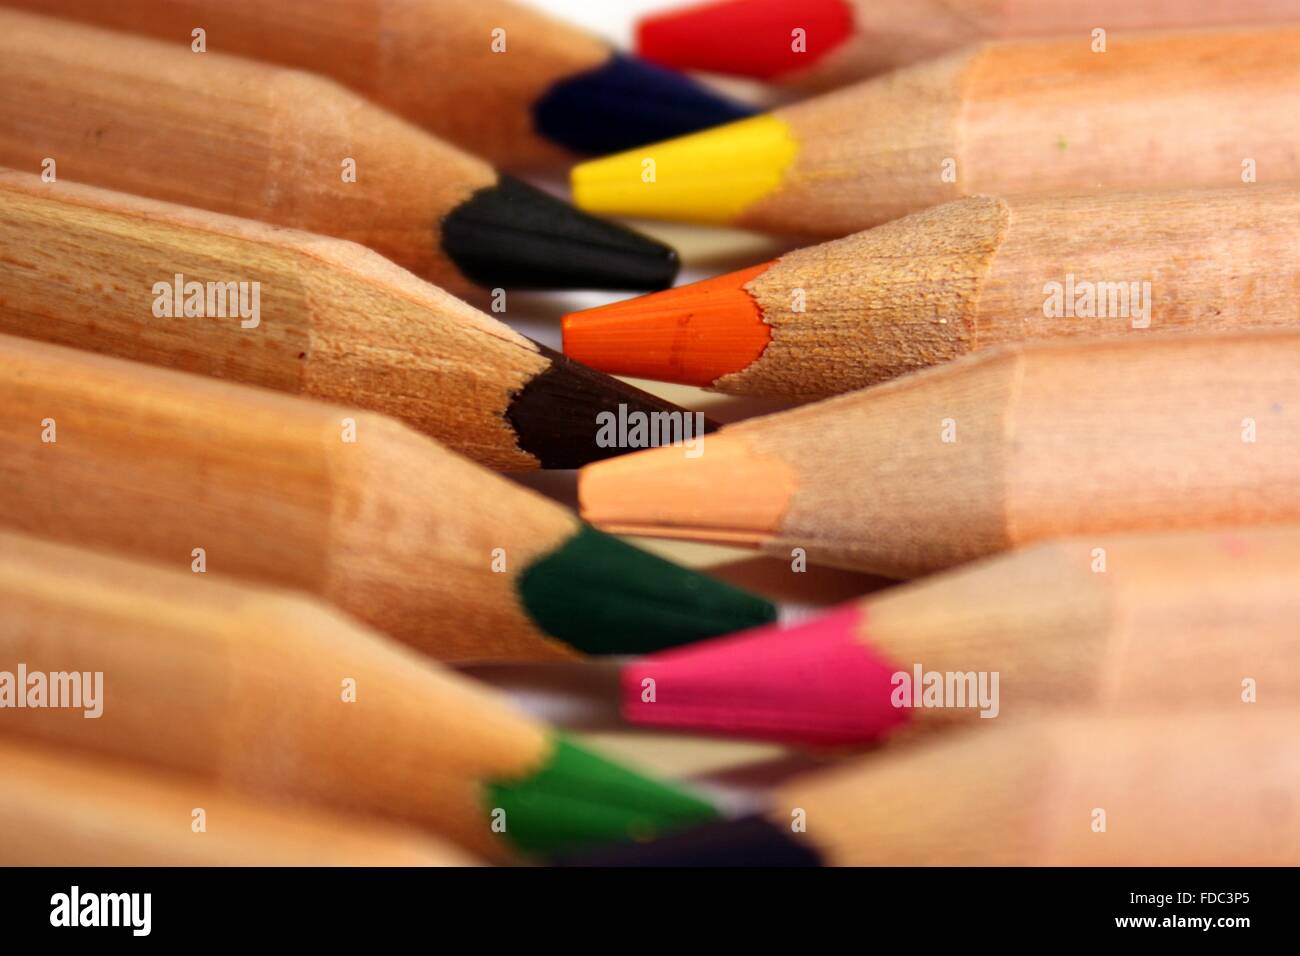 Colored pencils. Several sharpened colored pencils for drawing Stock Photo